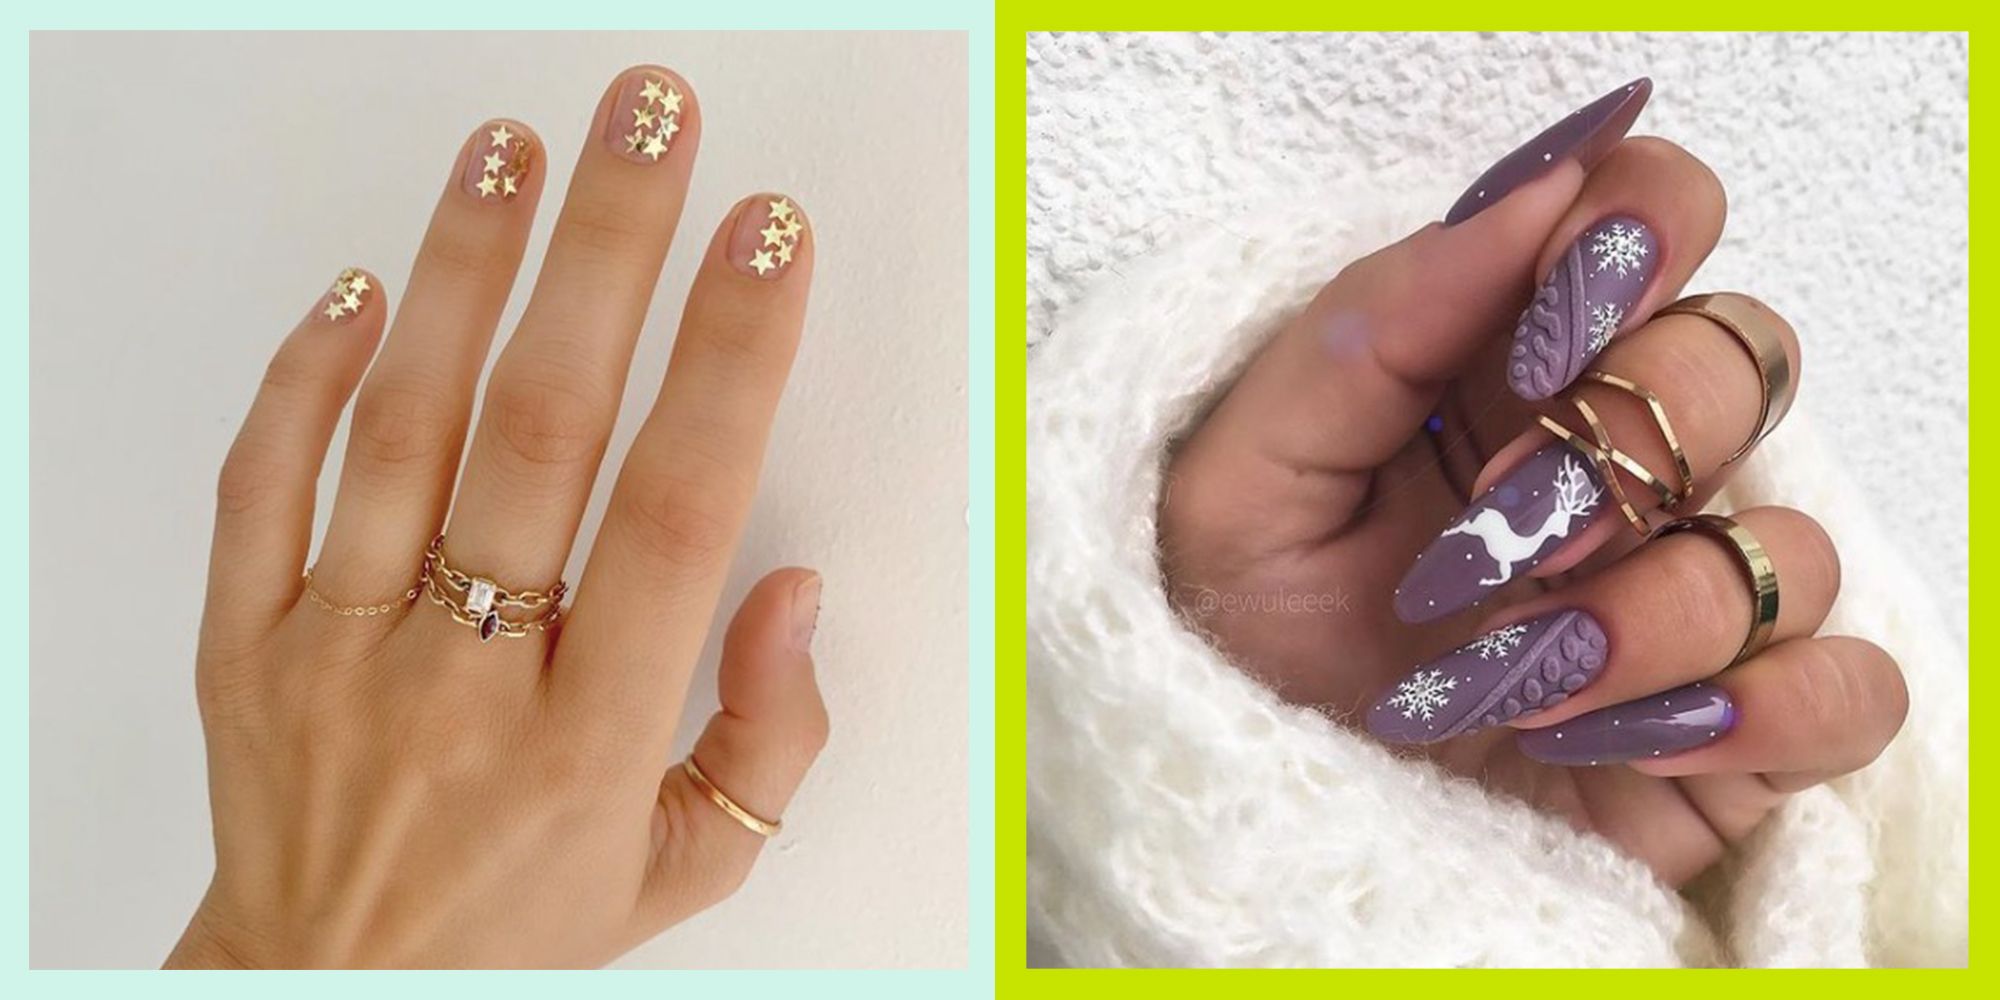 These Simple Nail Art Looks Are Perfect Year-Round